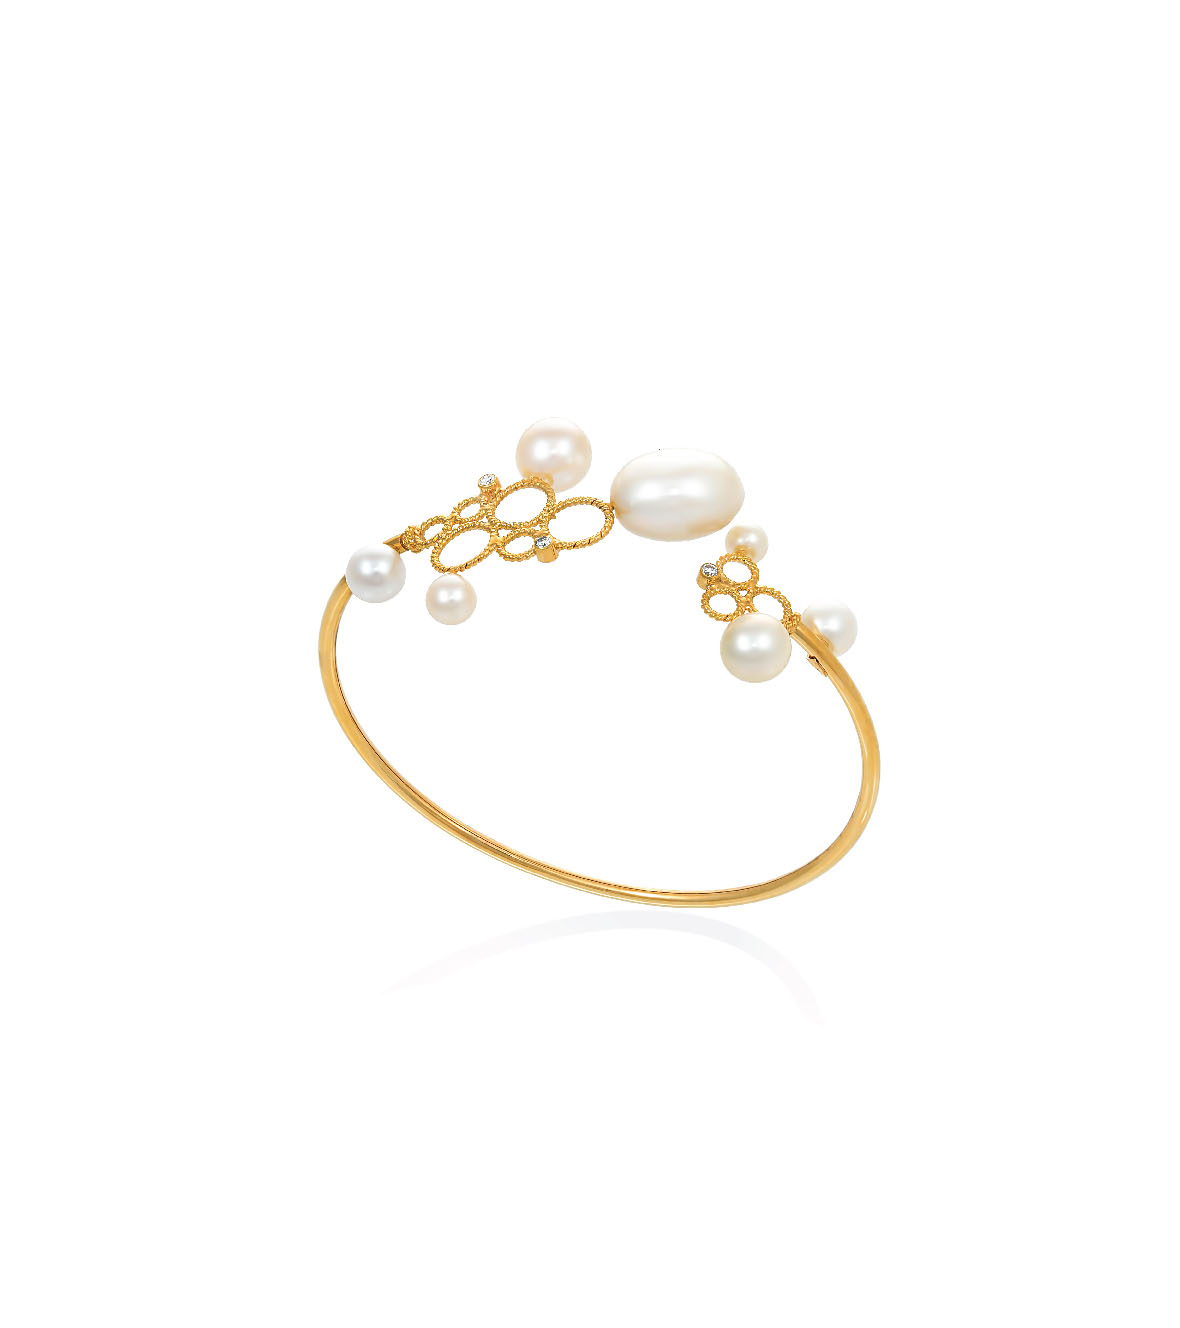 Wrist band with diamonds and pearls by Christina Soubli